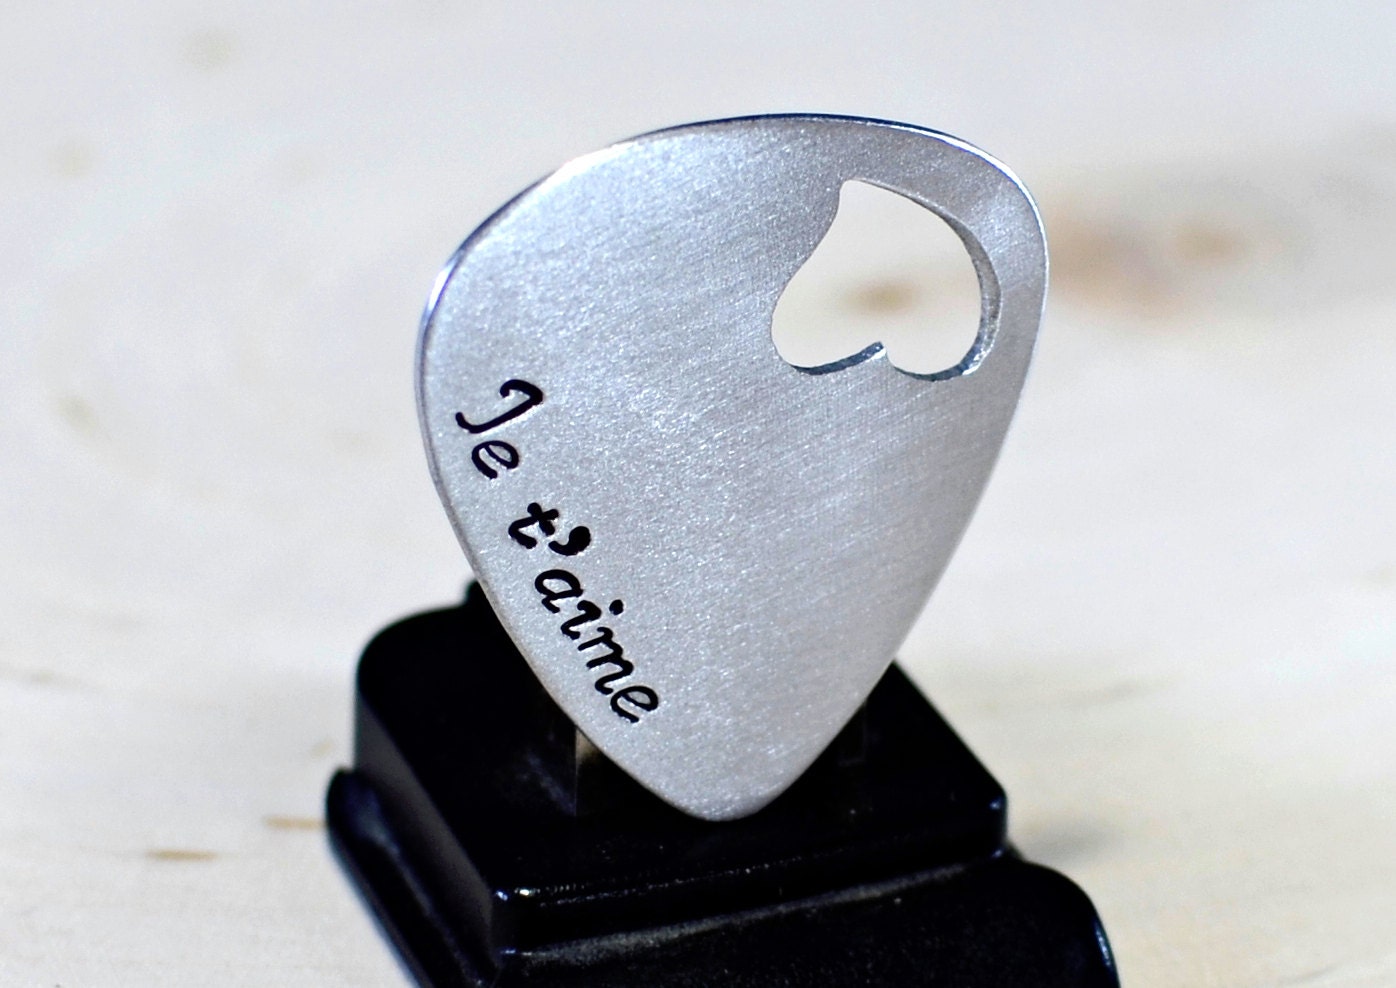 Je t'aime aluminum guitar pick with heart